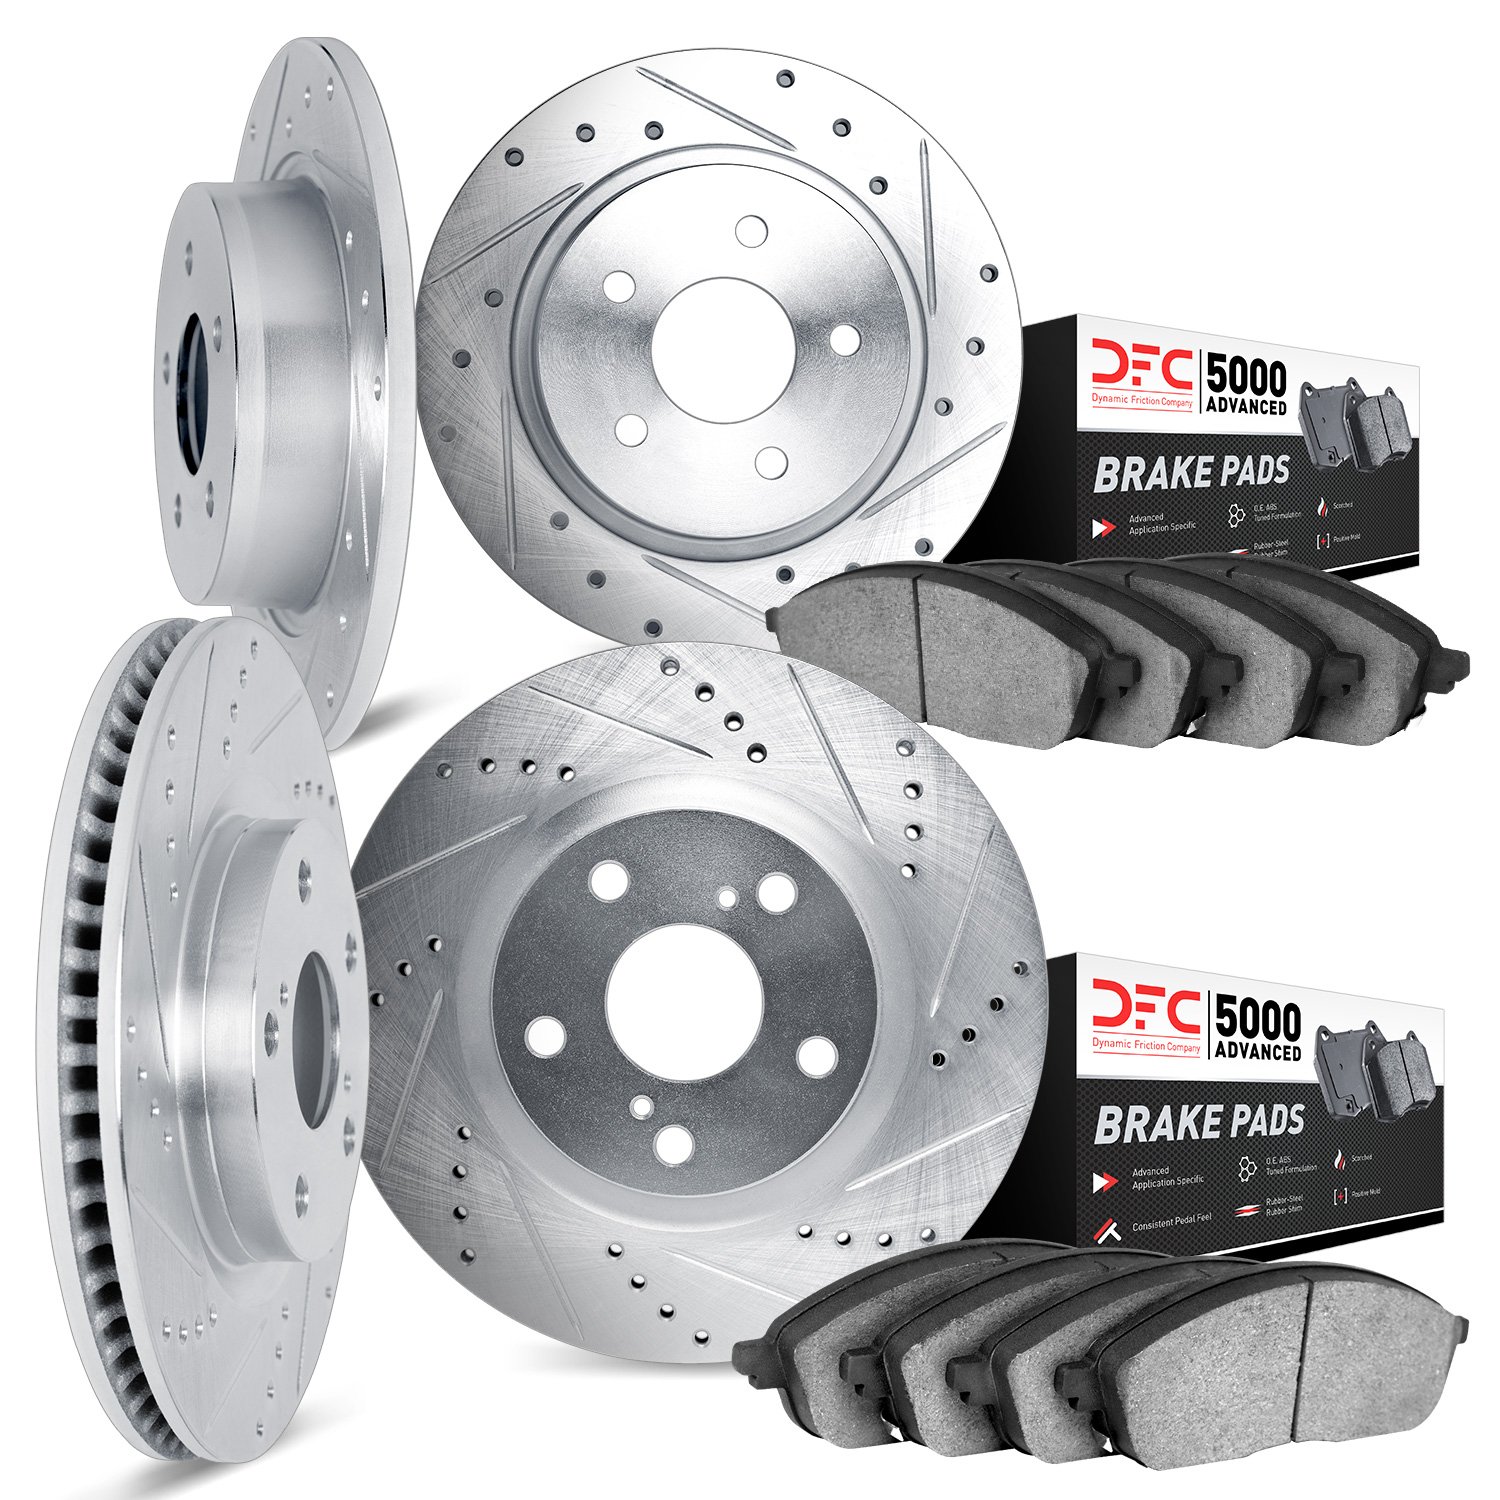 7504-76147 Drilled/Slotted Brake Rotors w/5000 Advanced Brake Pads Kit [Silver], 2000-2005 Lexus/Toyota/Scion, Position: Front a